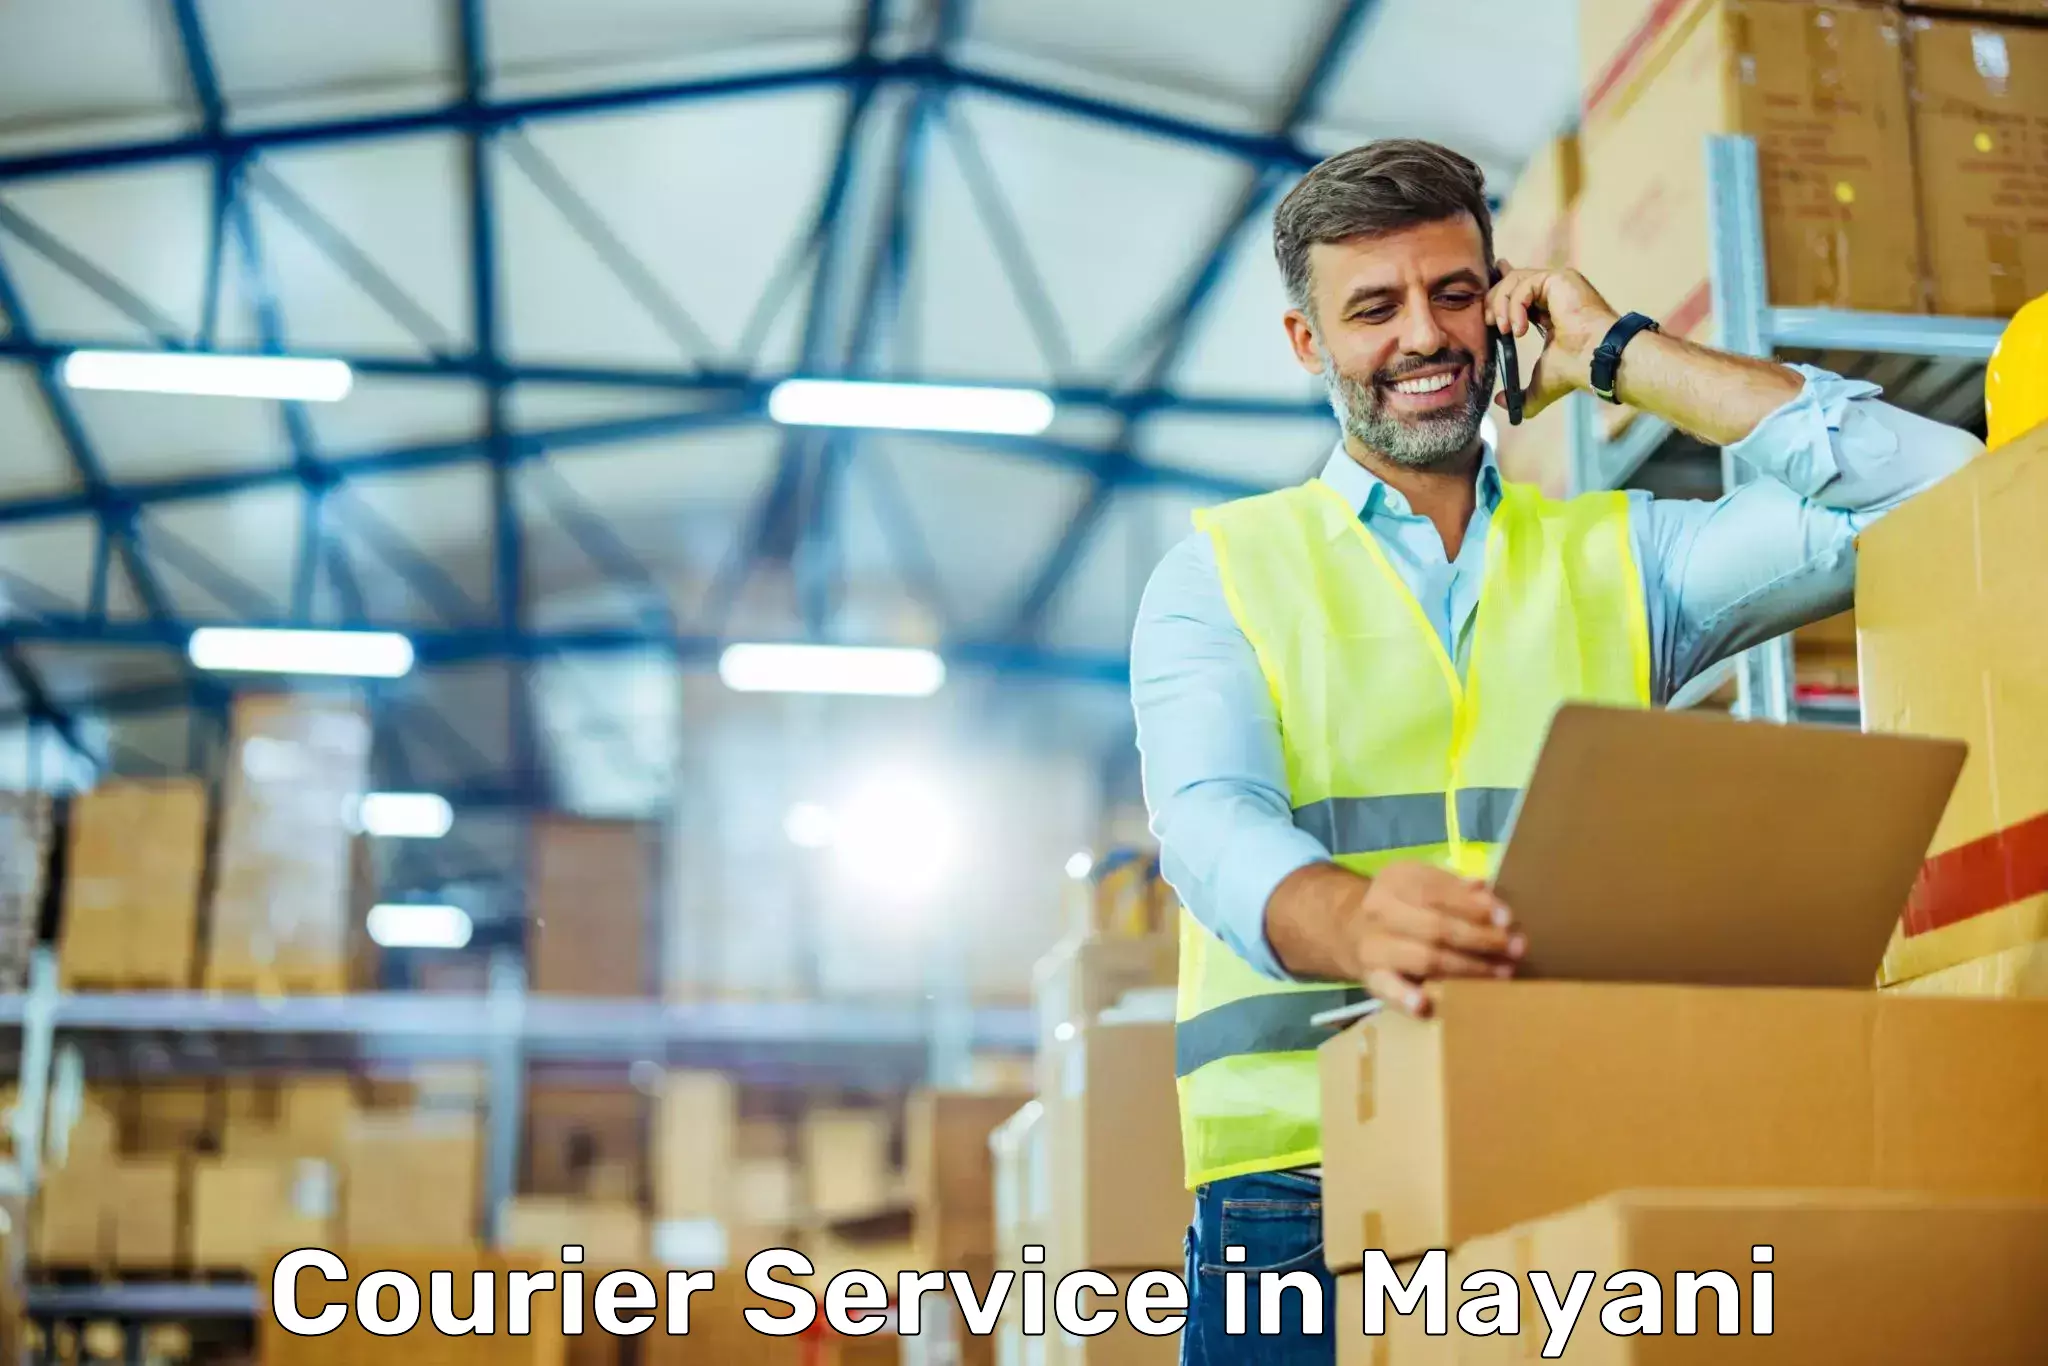 Courier services in Mayani